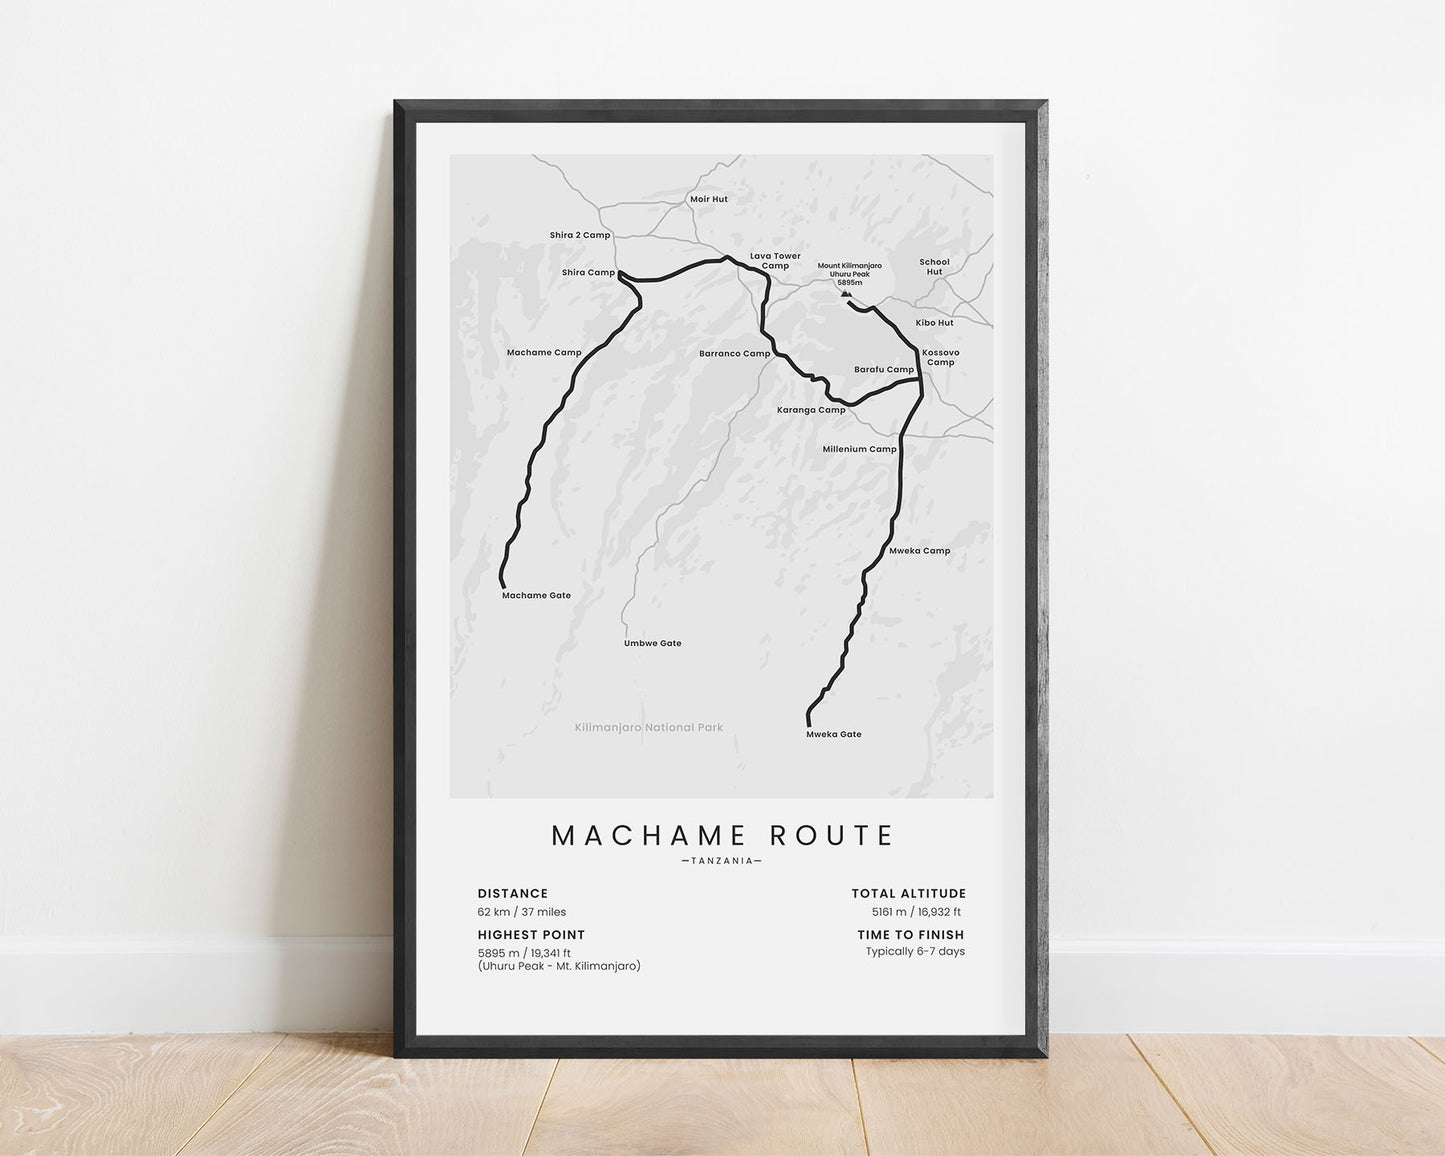 Machame Route (Tanzania) trek wall map with white background